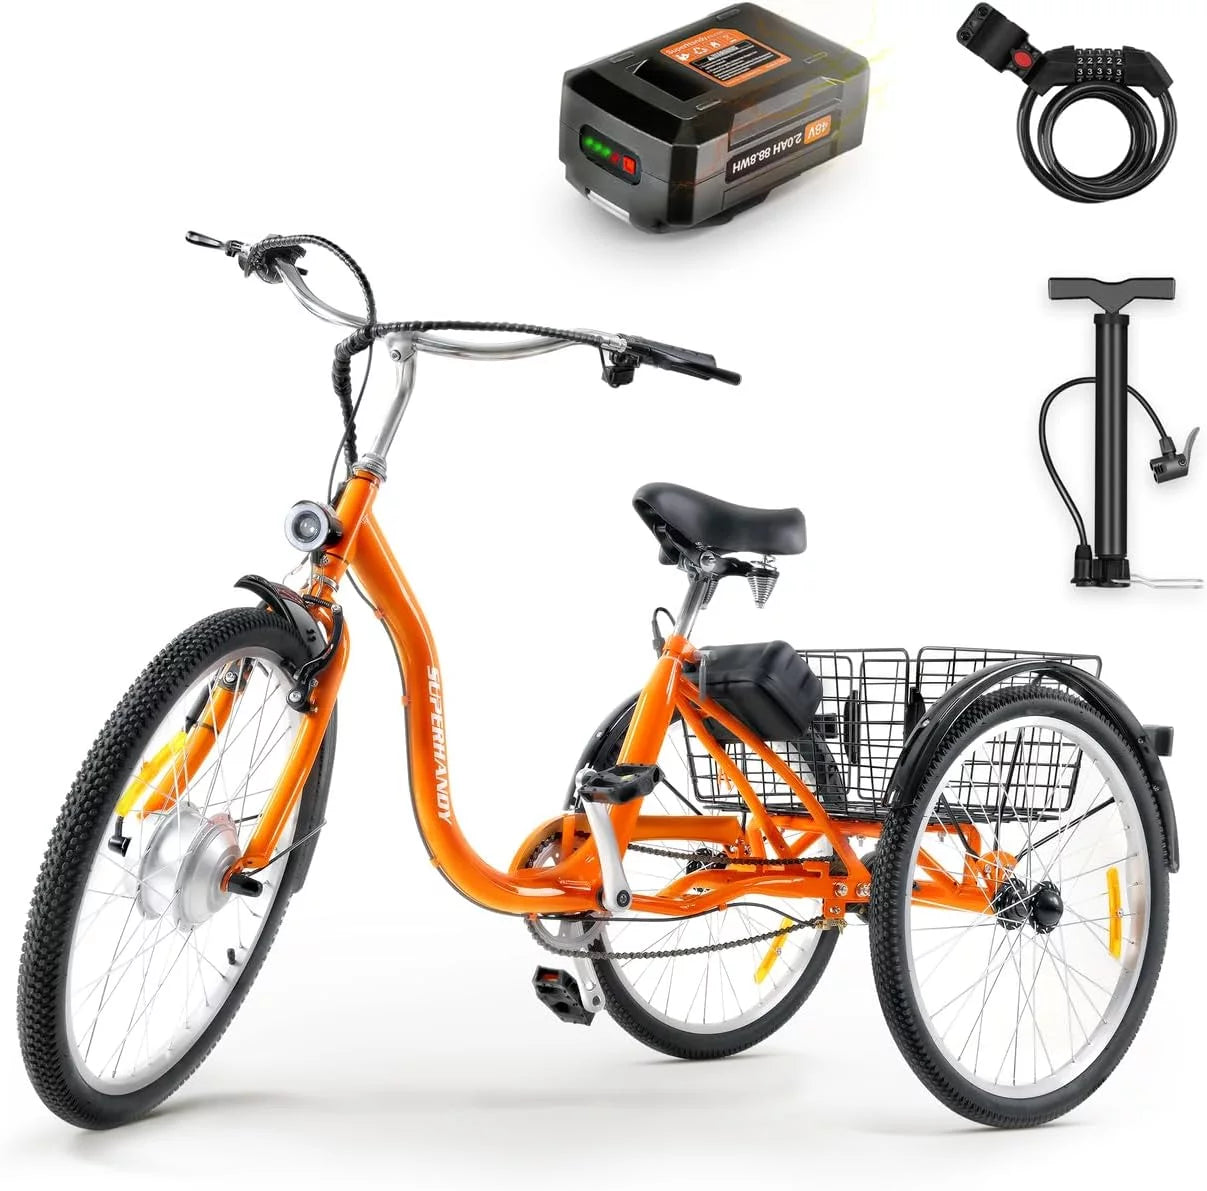 SuperHandy Adult Tricycle Electric Bike - EcoRide 3 Modes, Adaptive Pedal Assist Torque Sensor, 250W Motor, Lithium Battery, 330LB Capacity, Large Storage Basket, LED Headlight, LCD Display